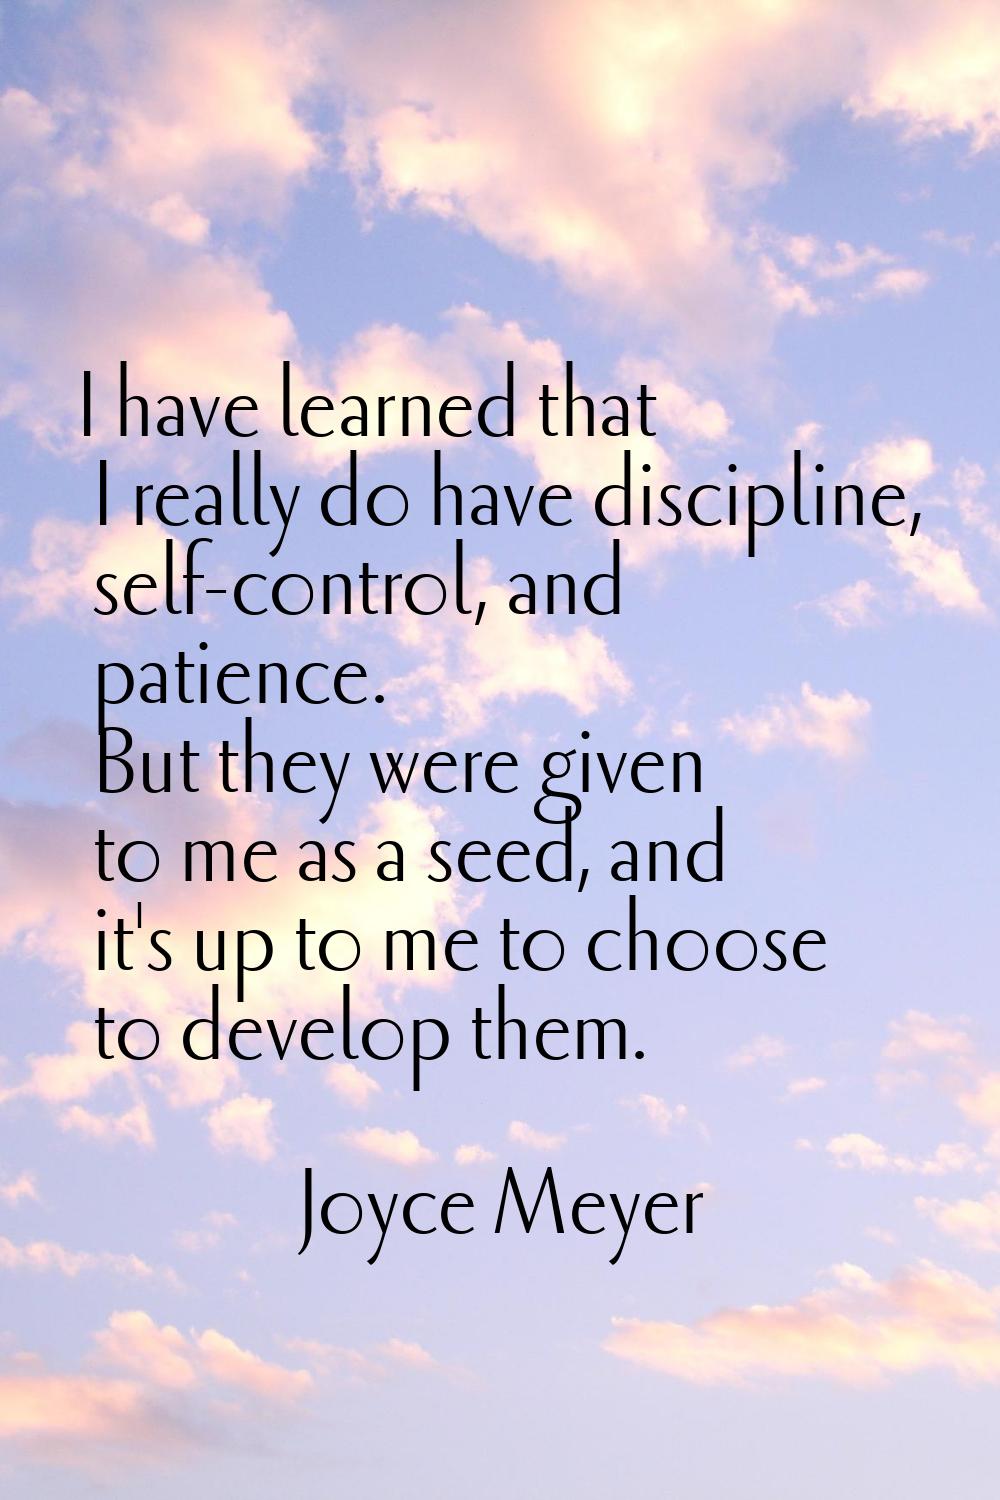 I have learned that I really do have discipline, self-control, and patience. But they were given to